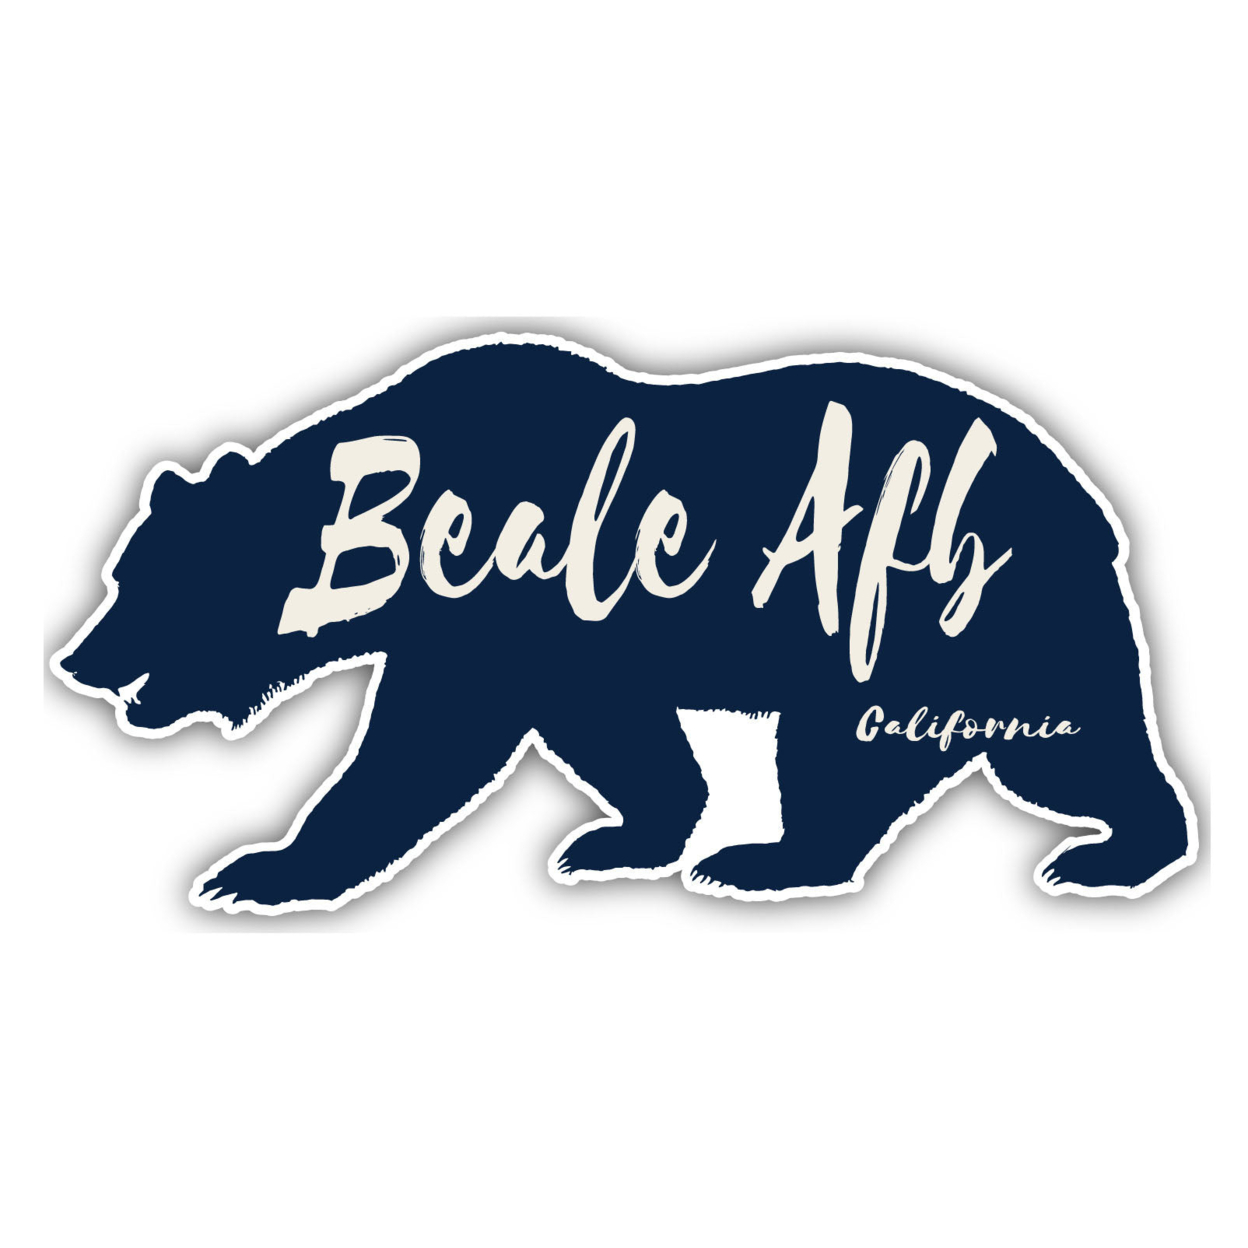 Beale AFB California Souvenir Decorative Stickers (Choose Theme And Size) - 4-Pack, 4-Inch, Bear